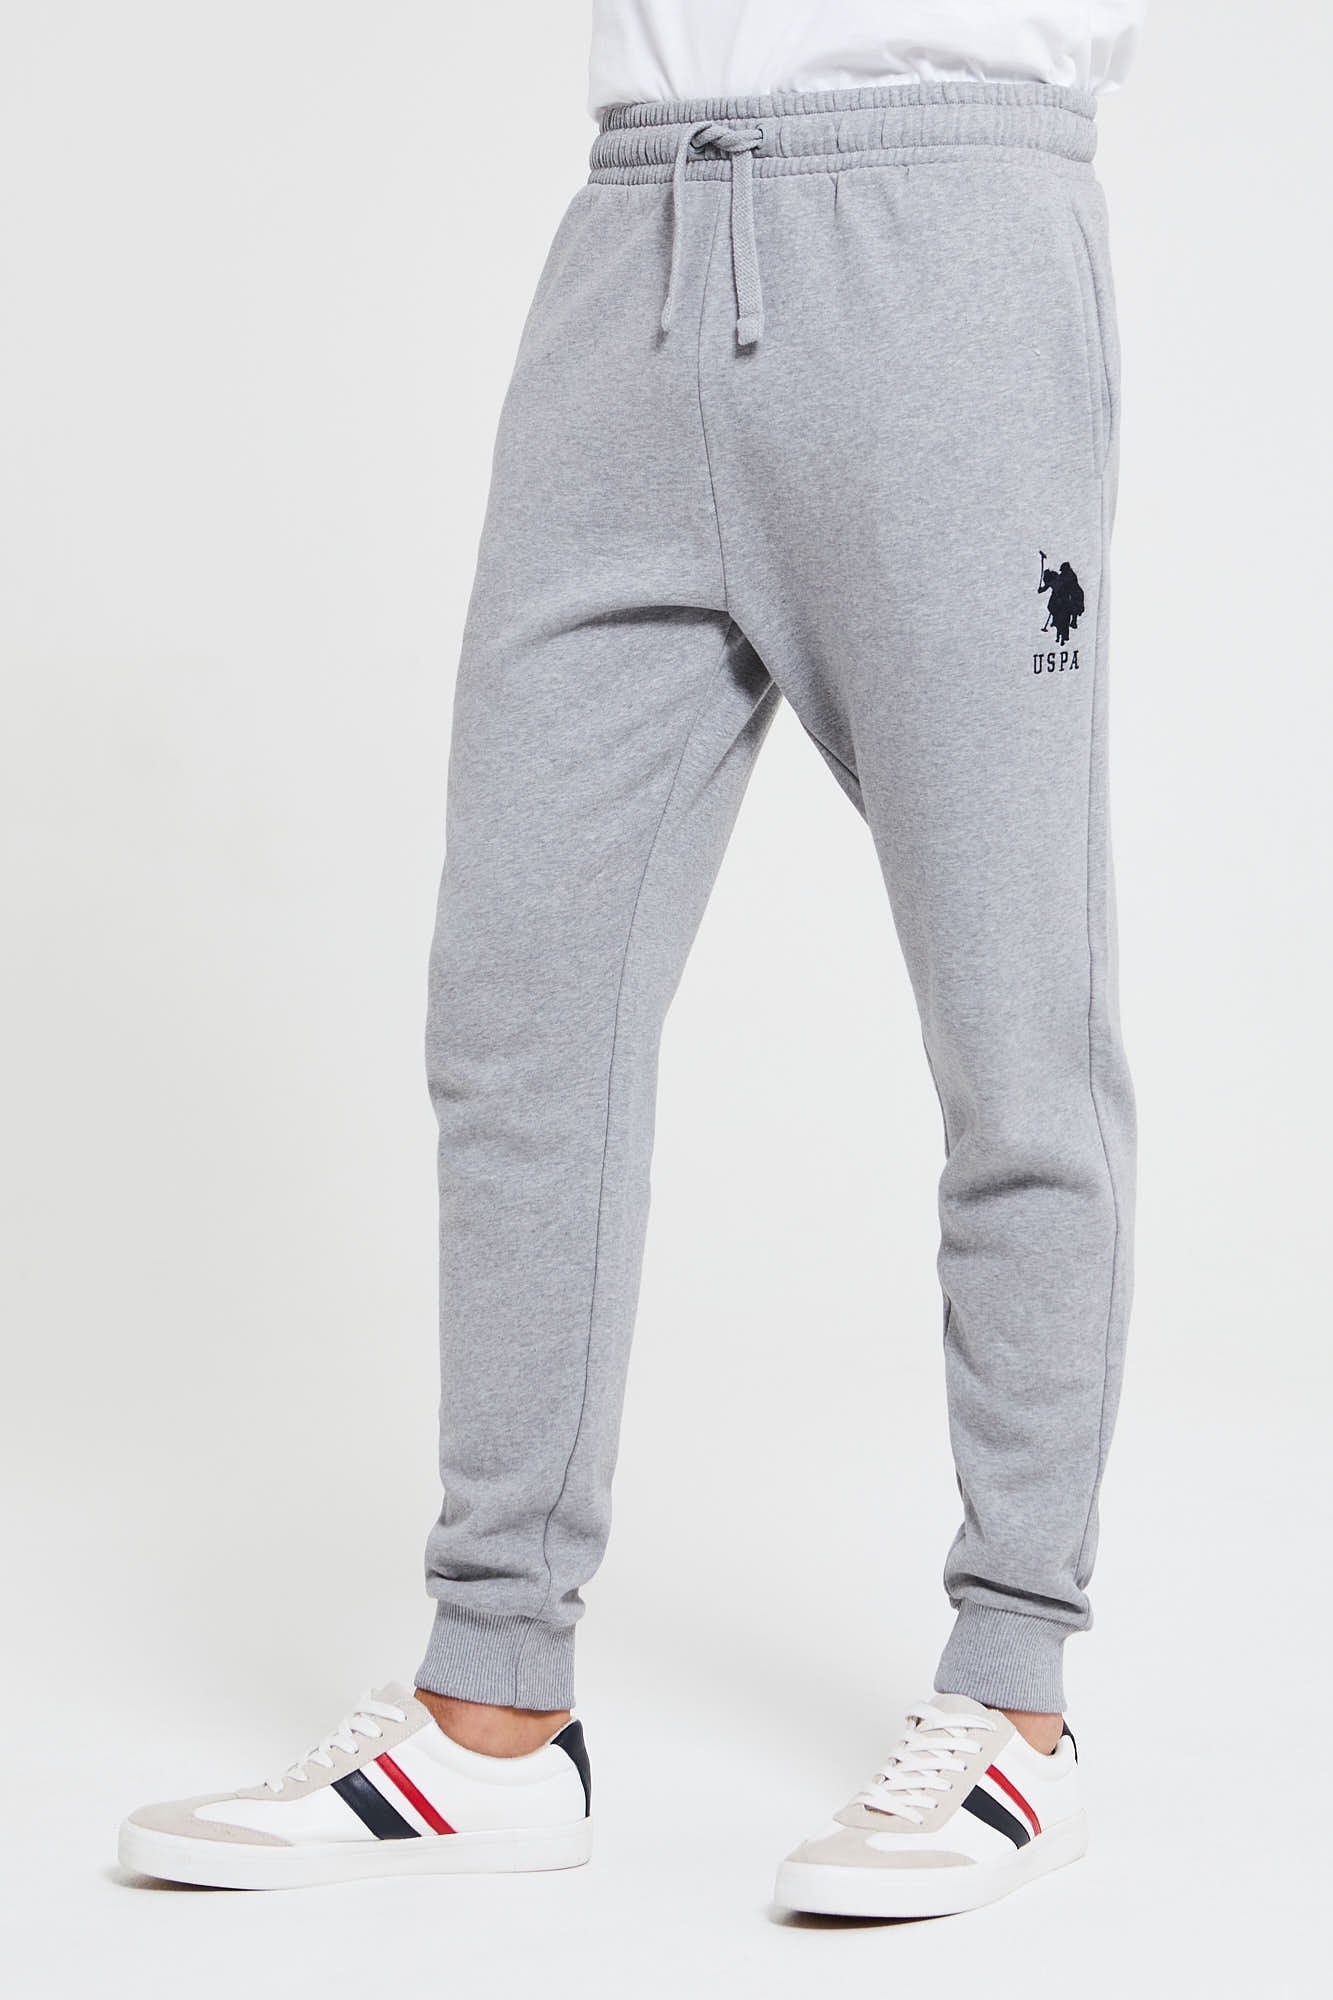 Mens Player 3 Joggers in Vintage Grey Heather